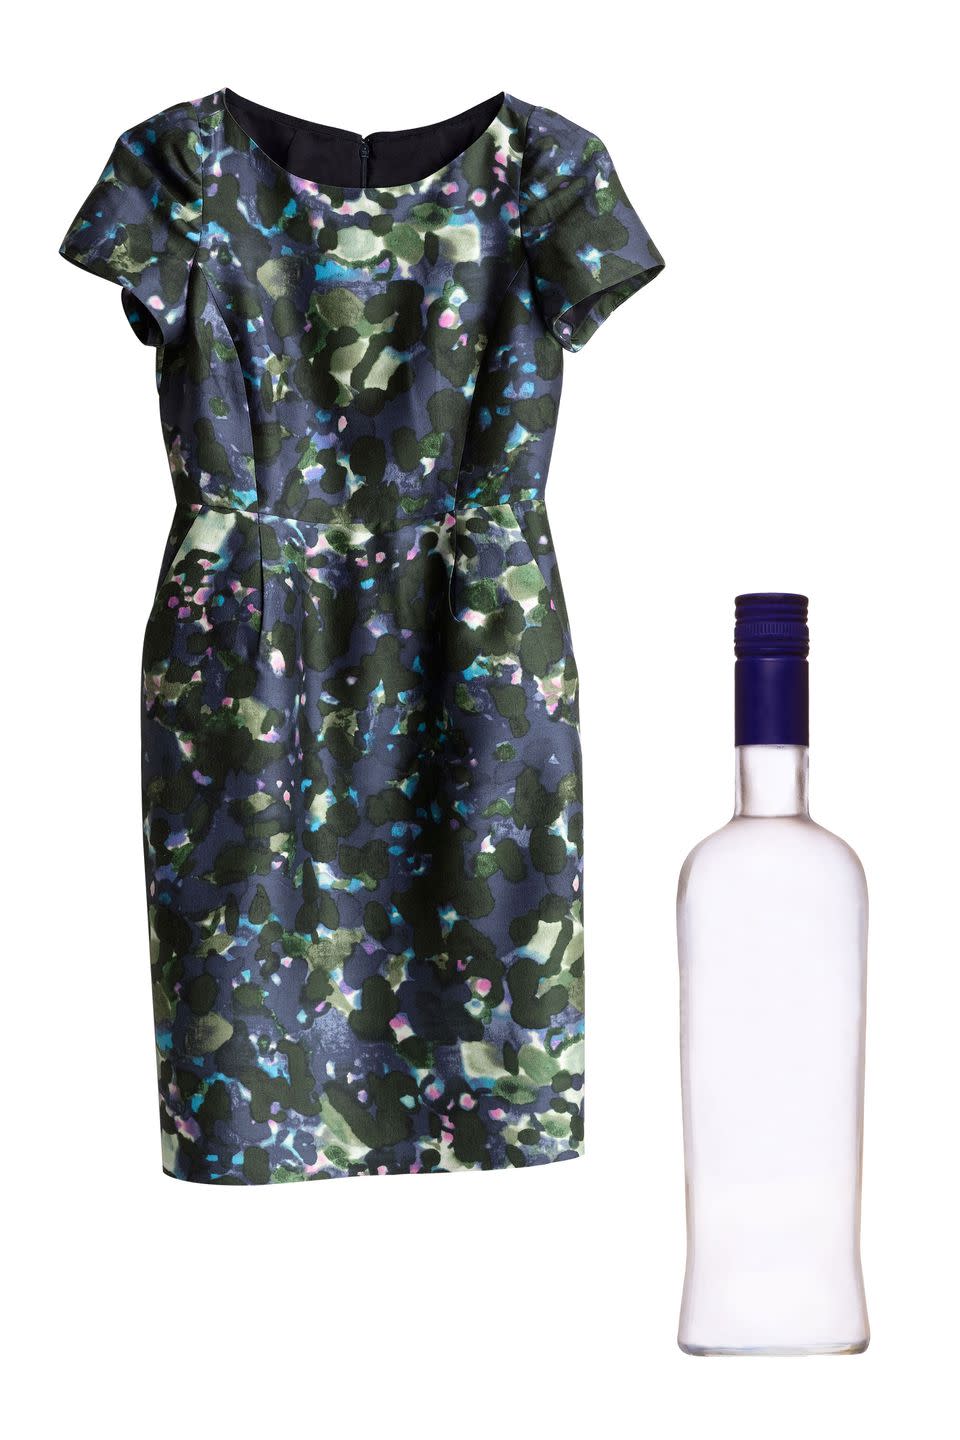 Deodorize clothes with vodka.